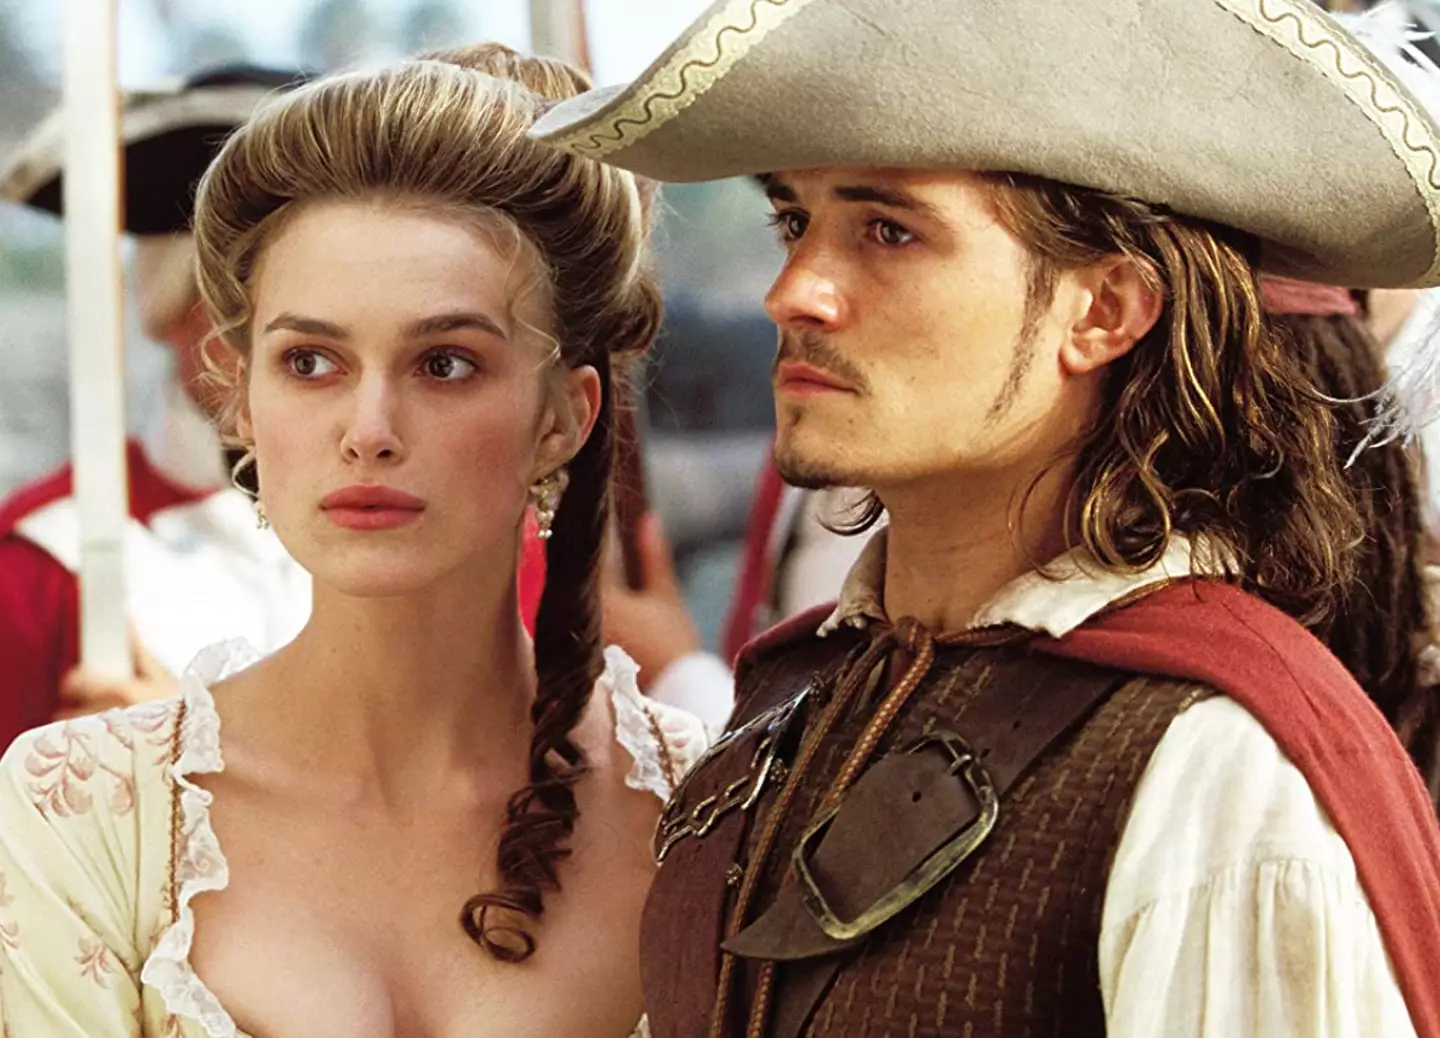 Knightley was still a teenager when she appeared in the film.